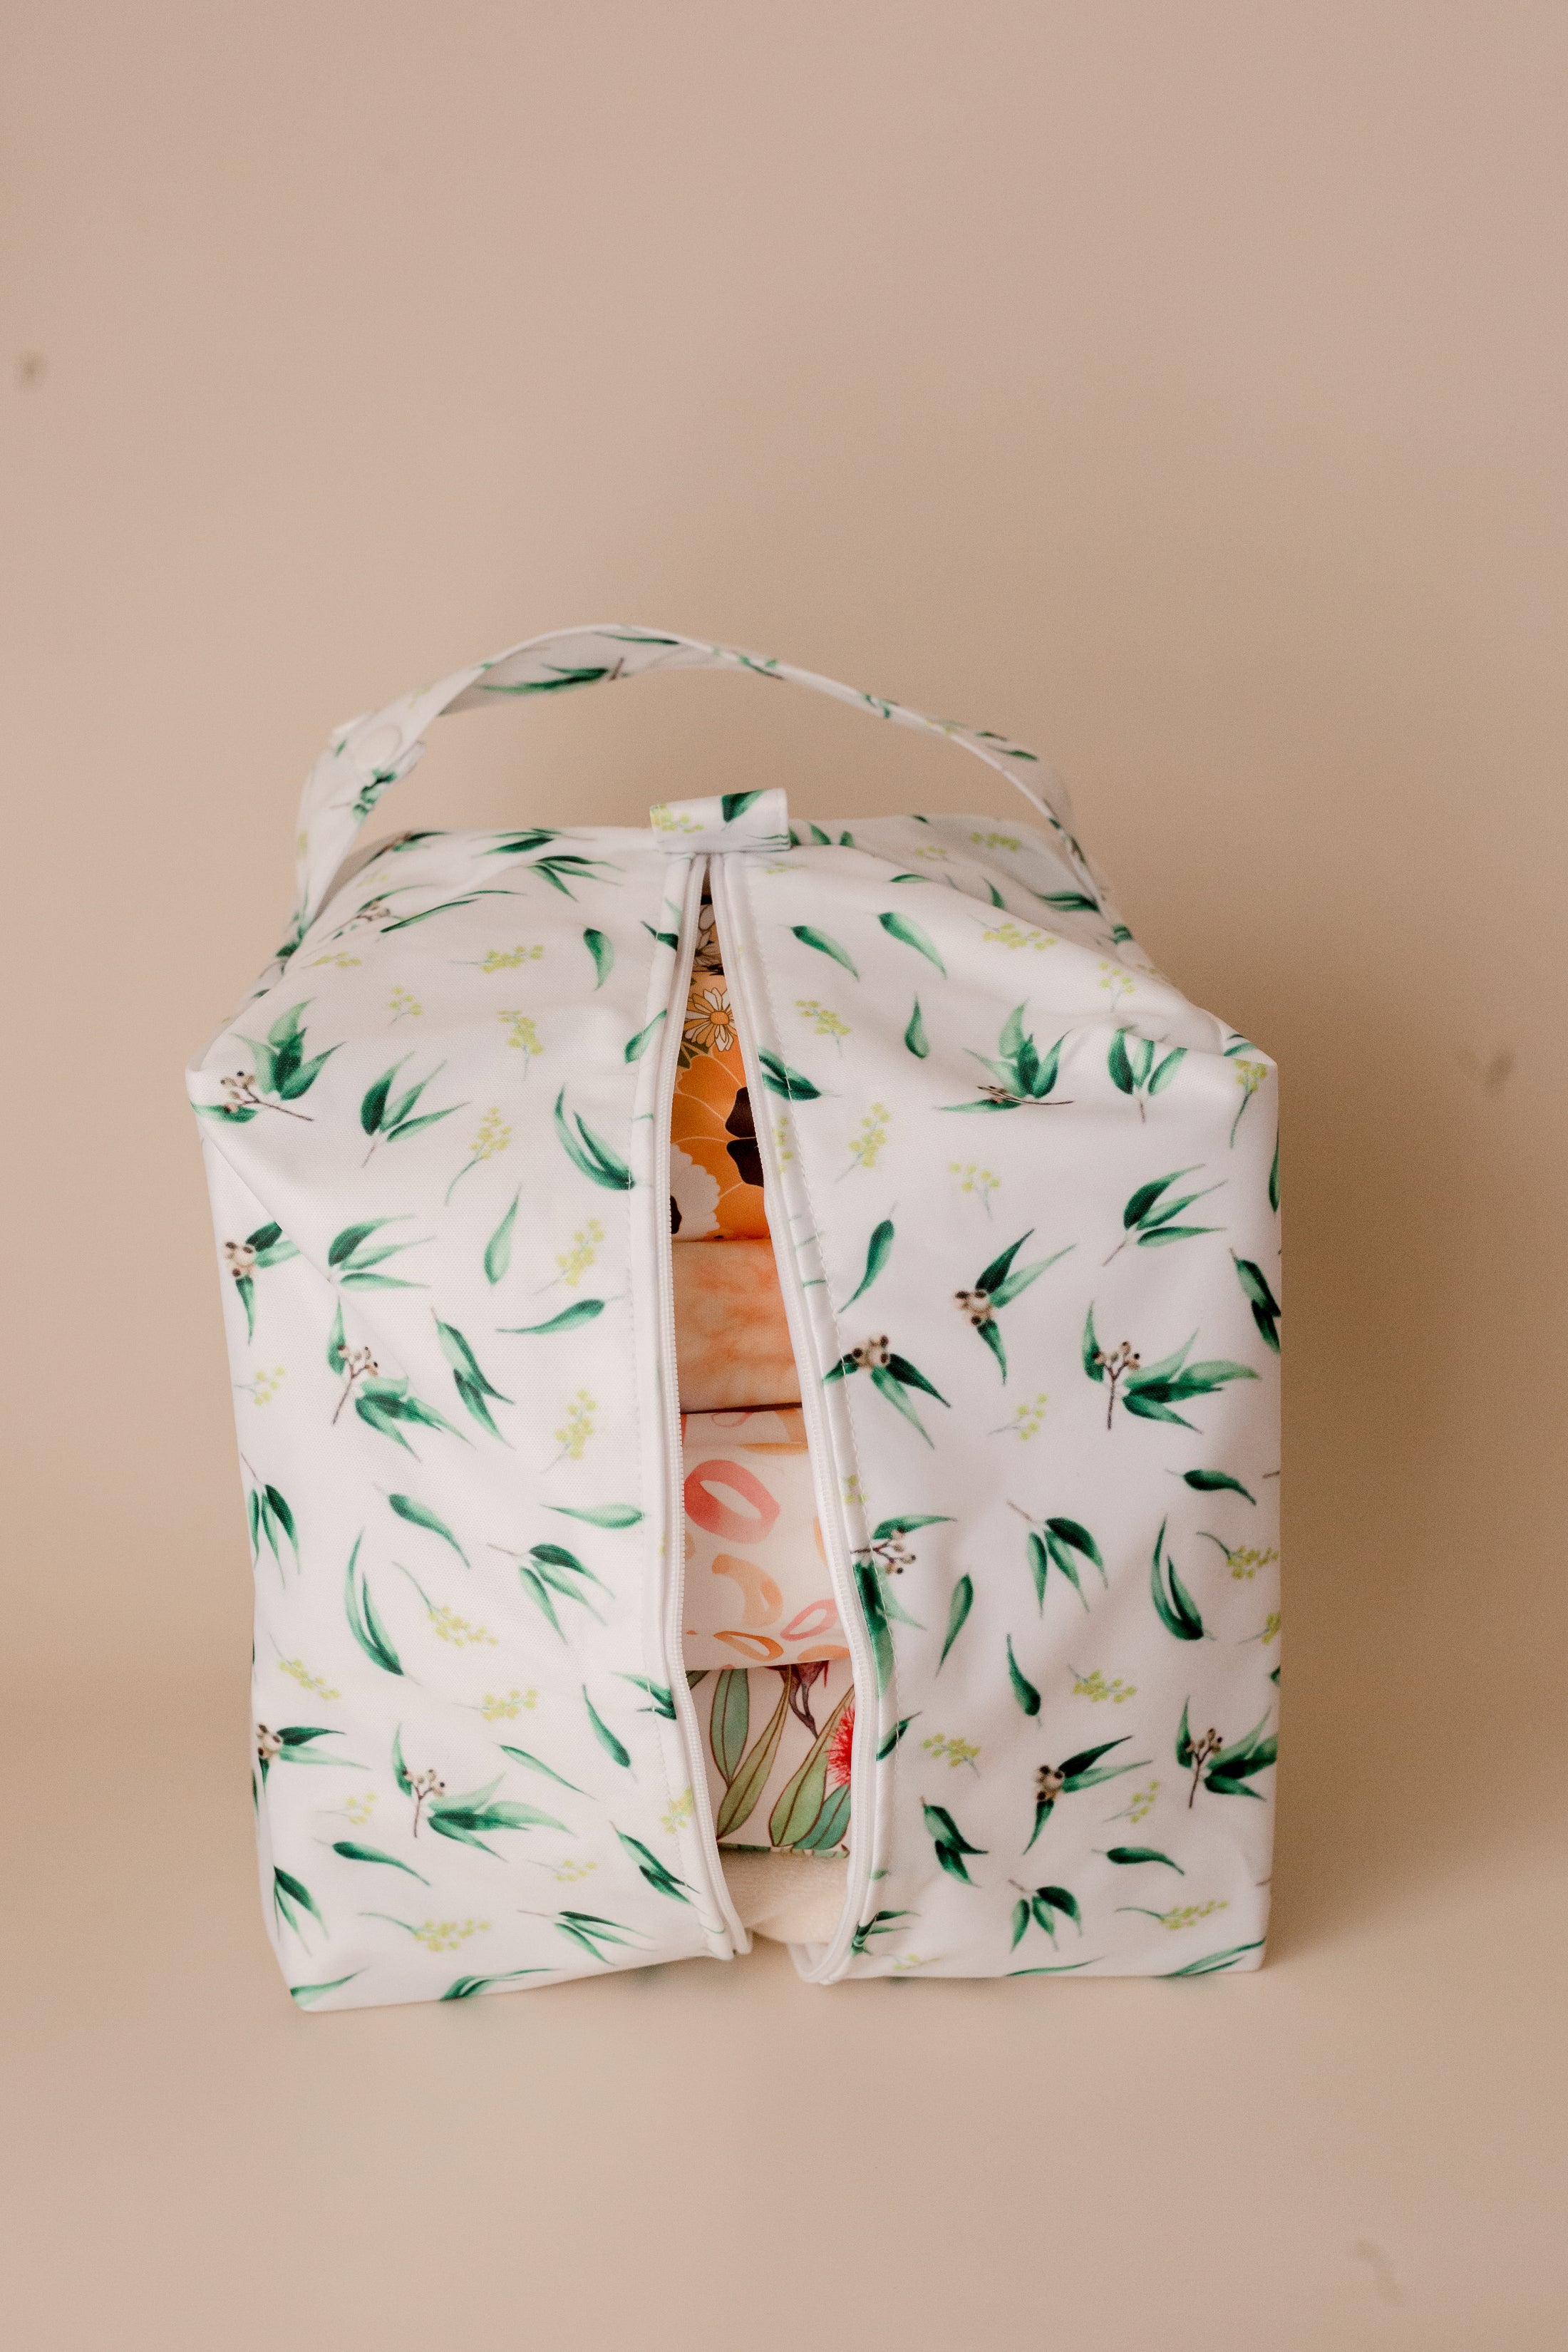 cloth nappy pod. cloth nappies by my little gumnut. reusable nappies. nappy carry bag. cloth nappies australia.